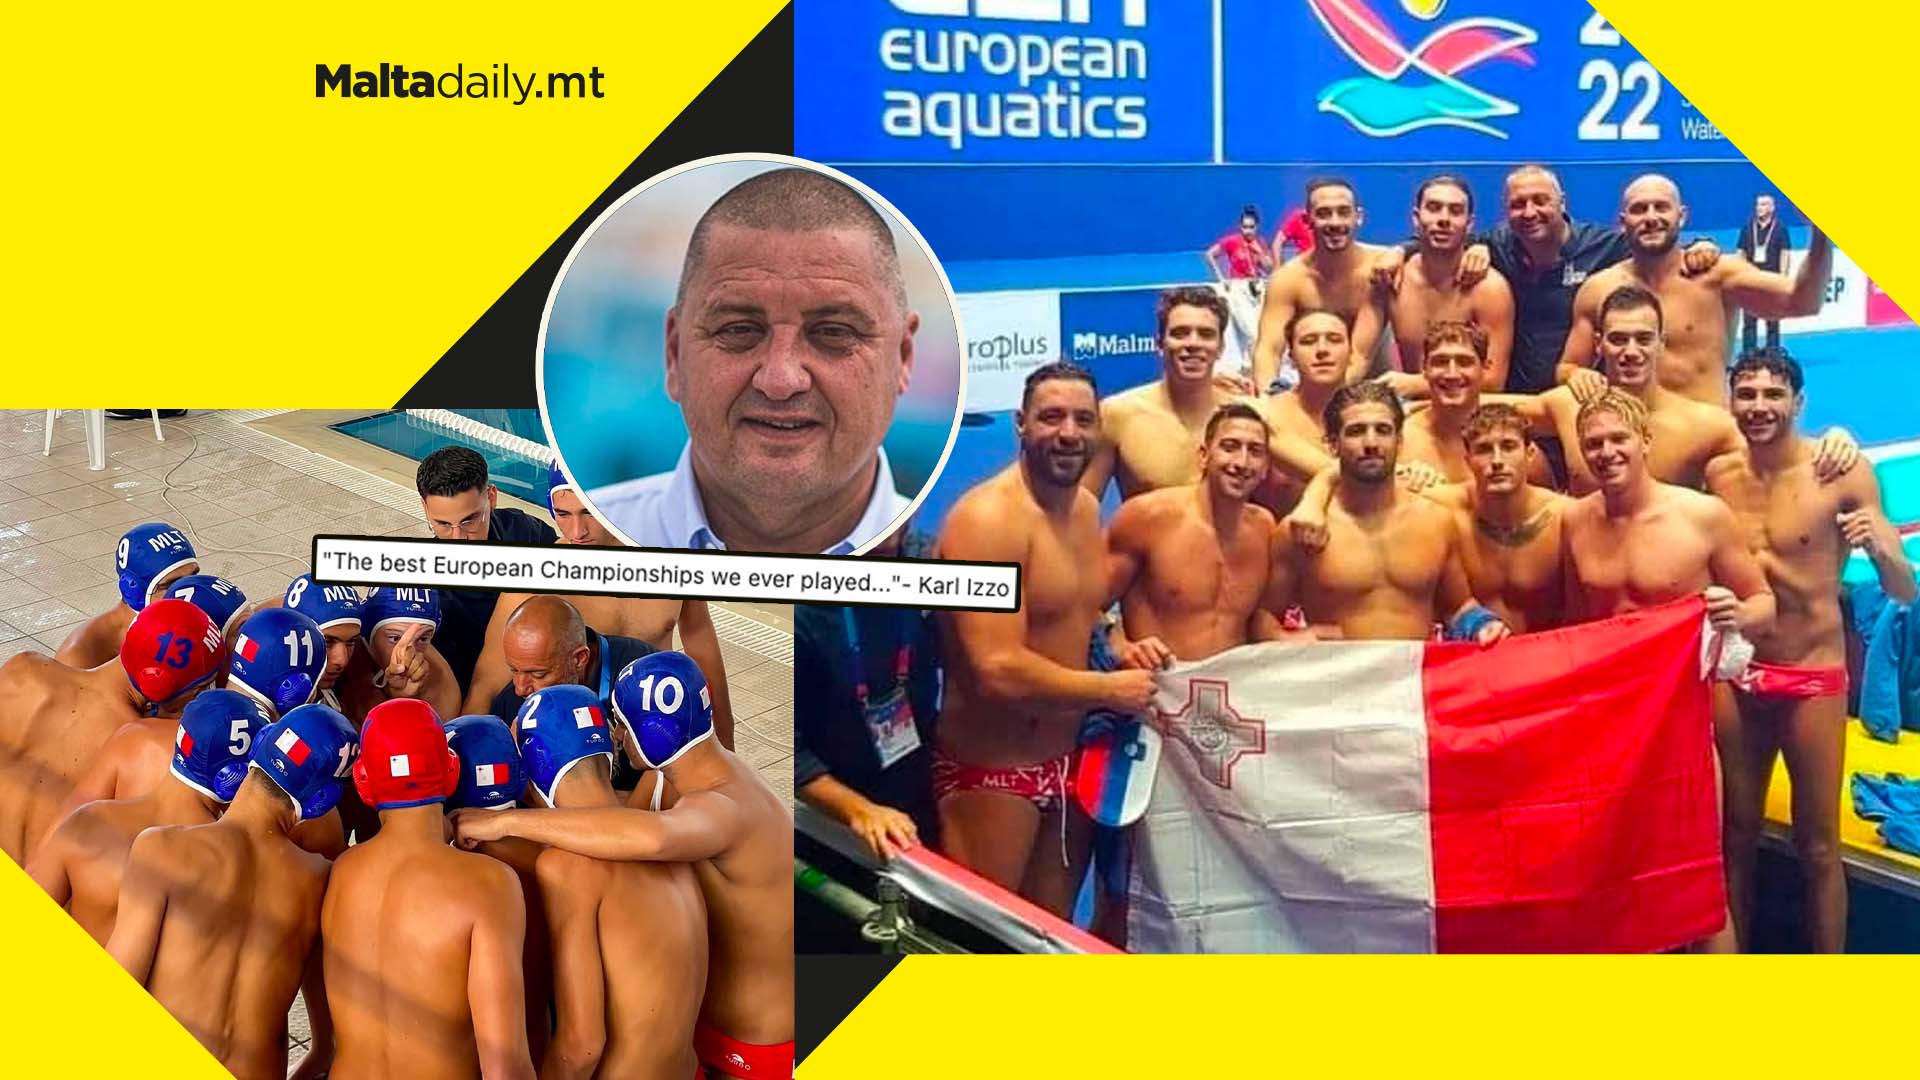 Malta waterpolo coach says future is bright for sport for local athletes